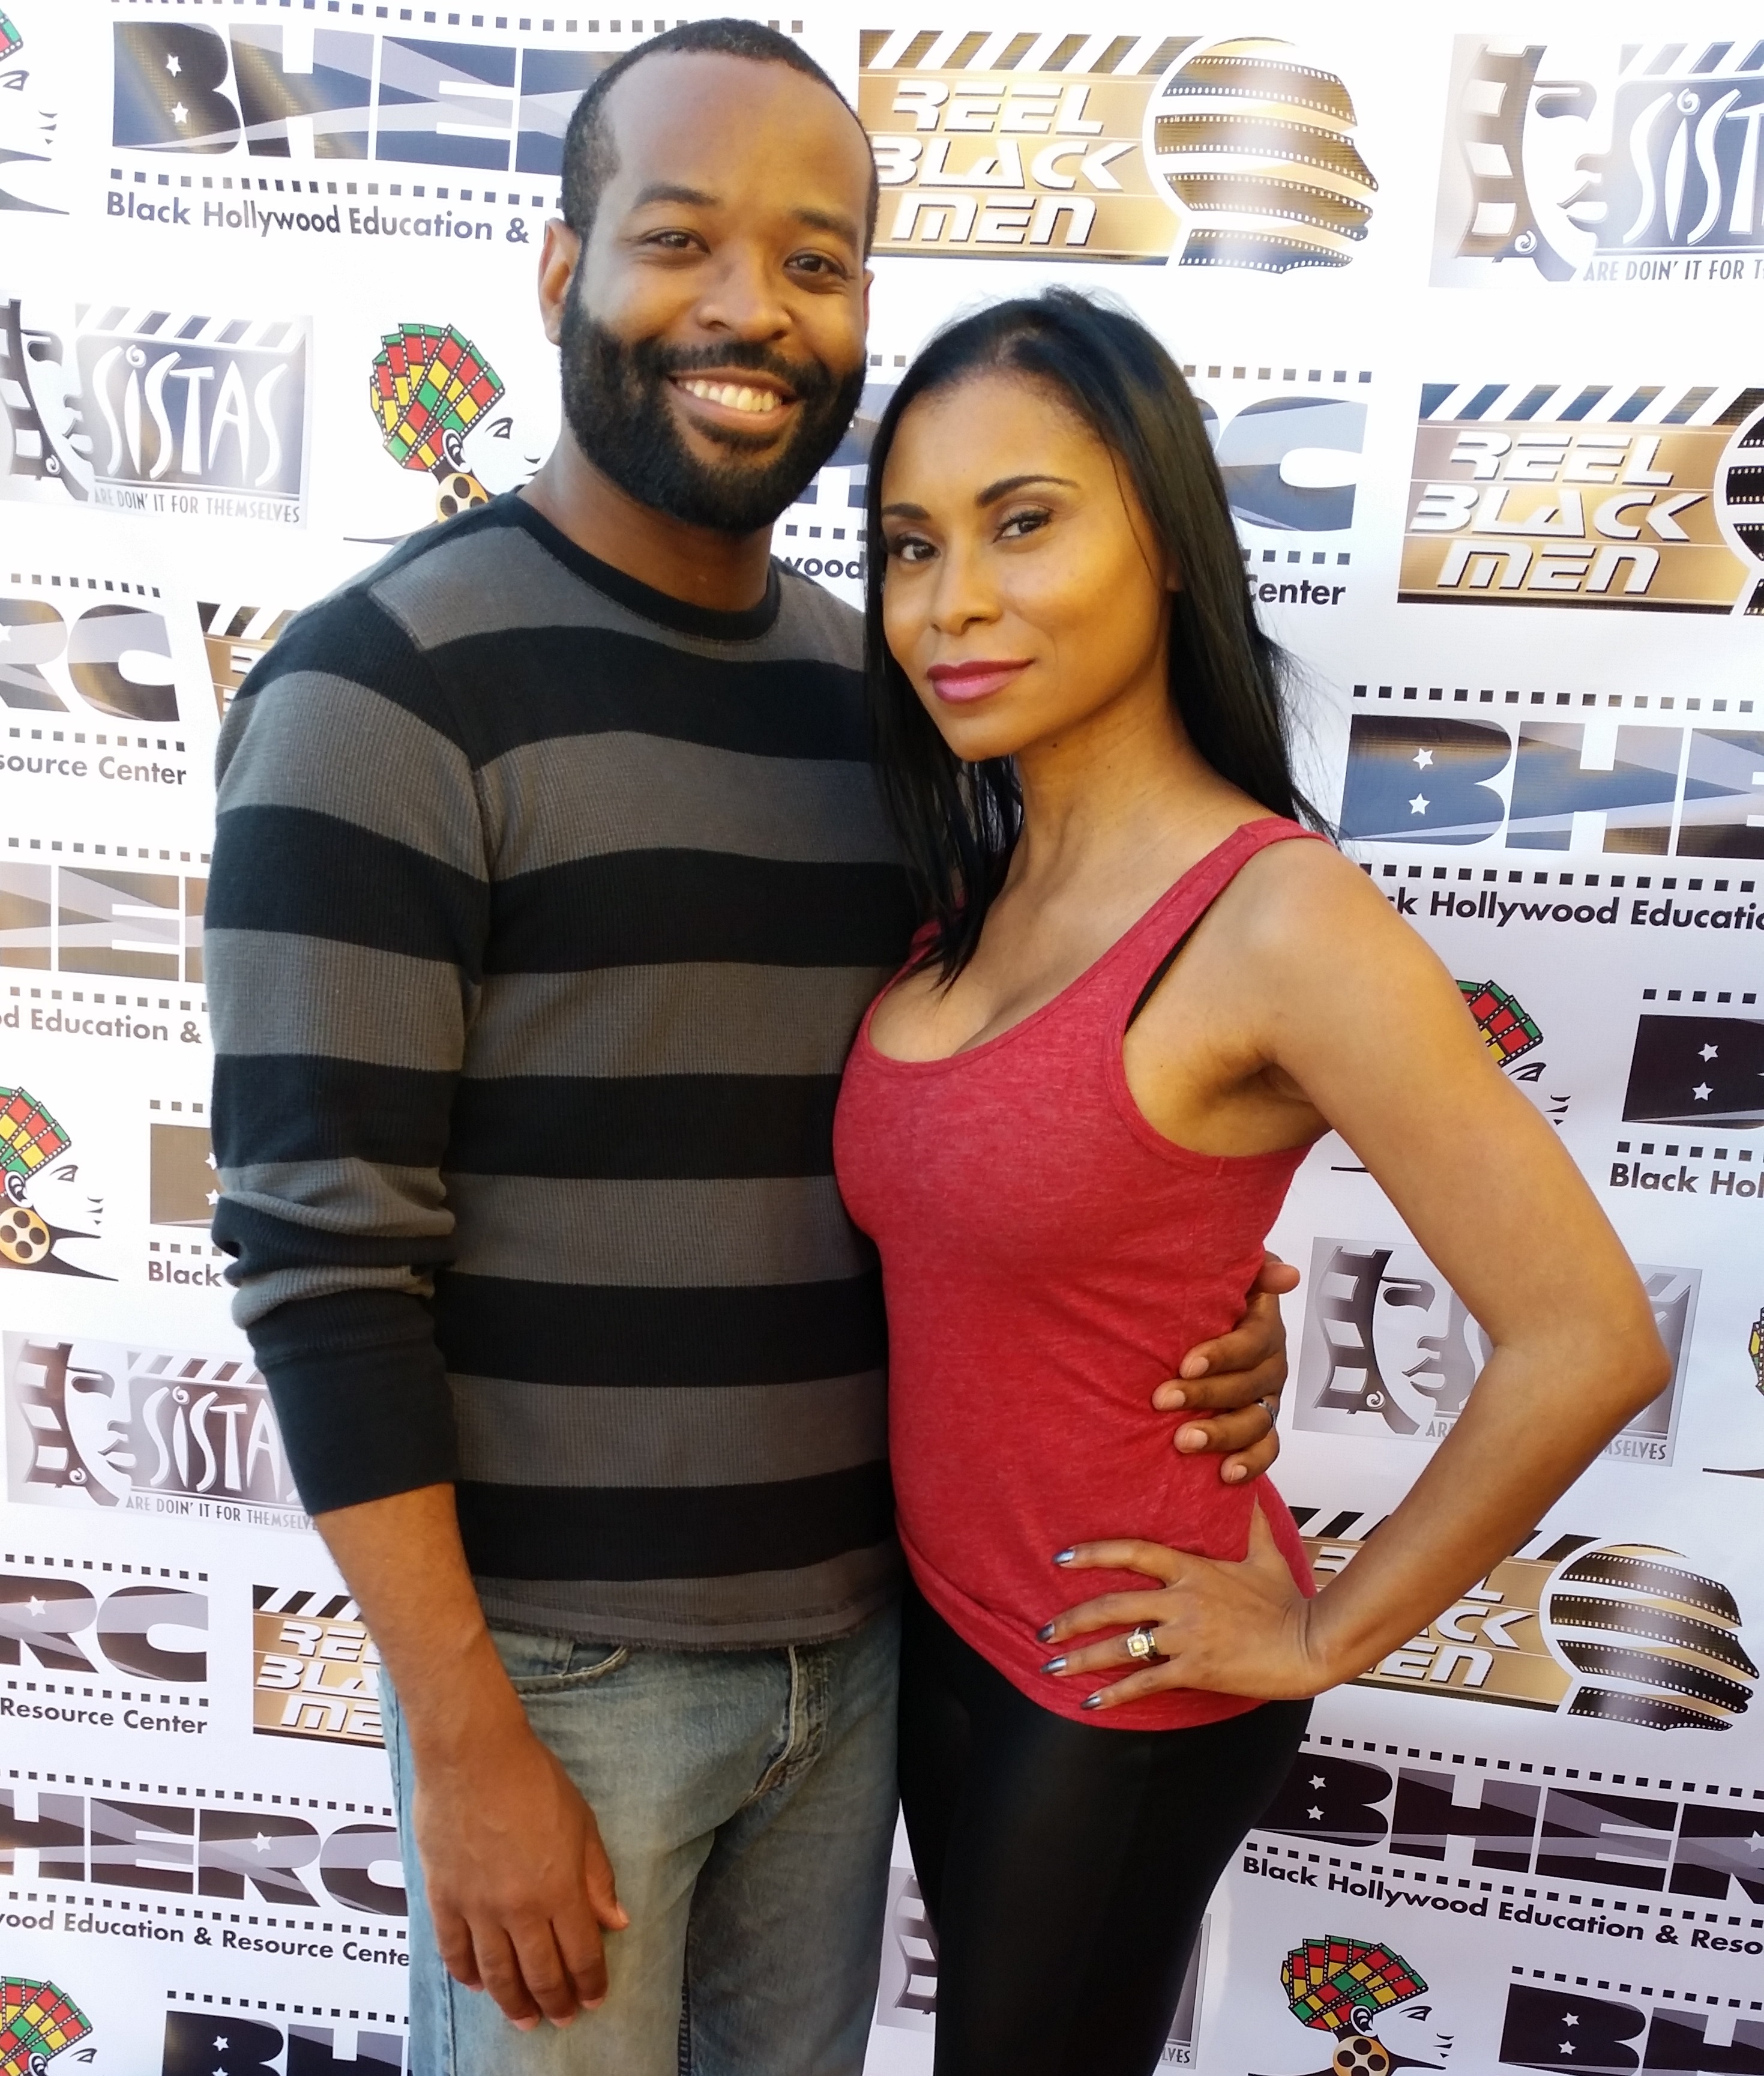 At the Black Hollywood Education and Resource Center for the African-American Film Marketplace film festival with Gerald Dewey